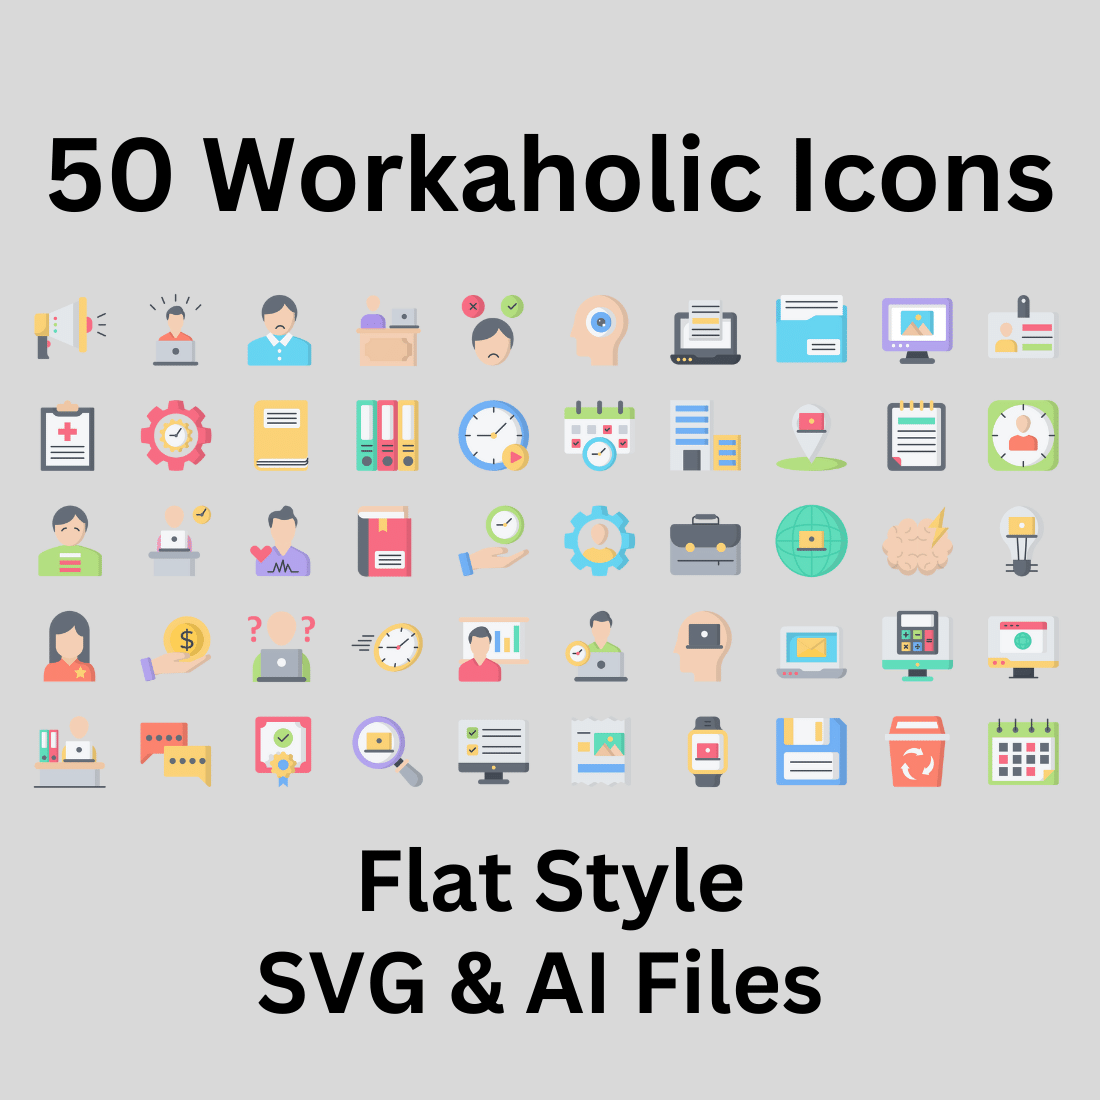 Workaholic Icon Set 50 Flat Icons - SVG And AI Files preview image.